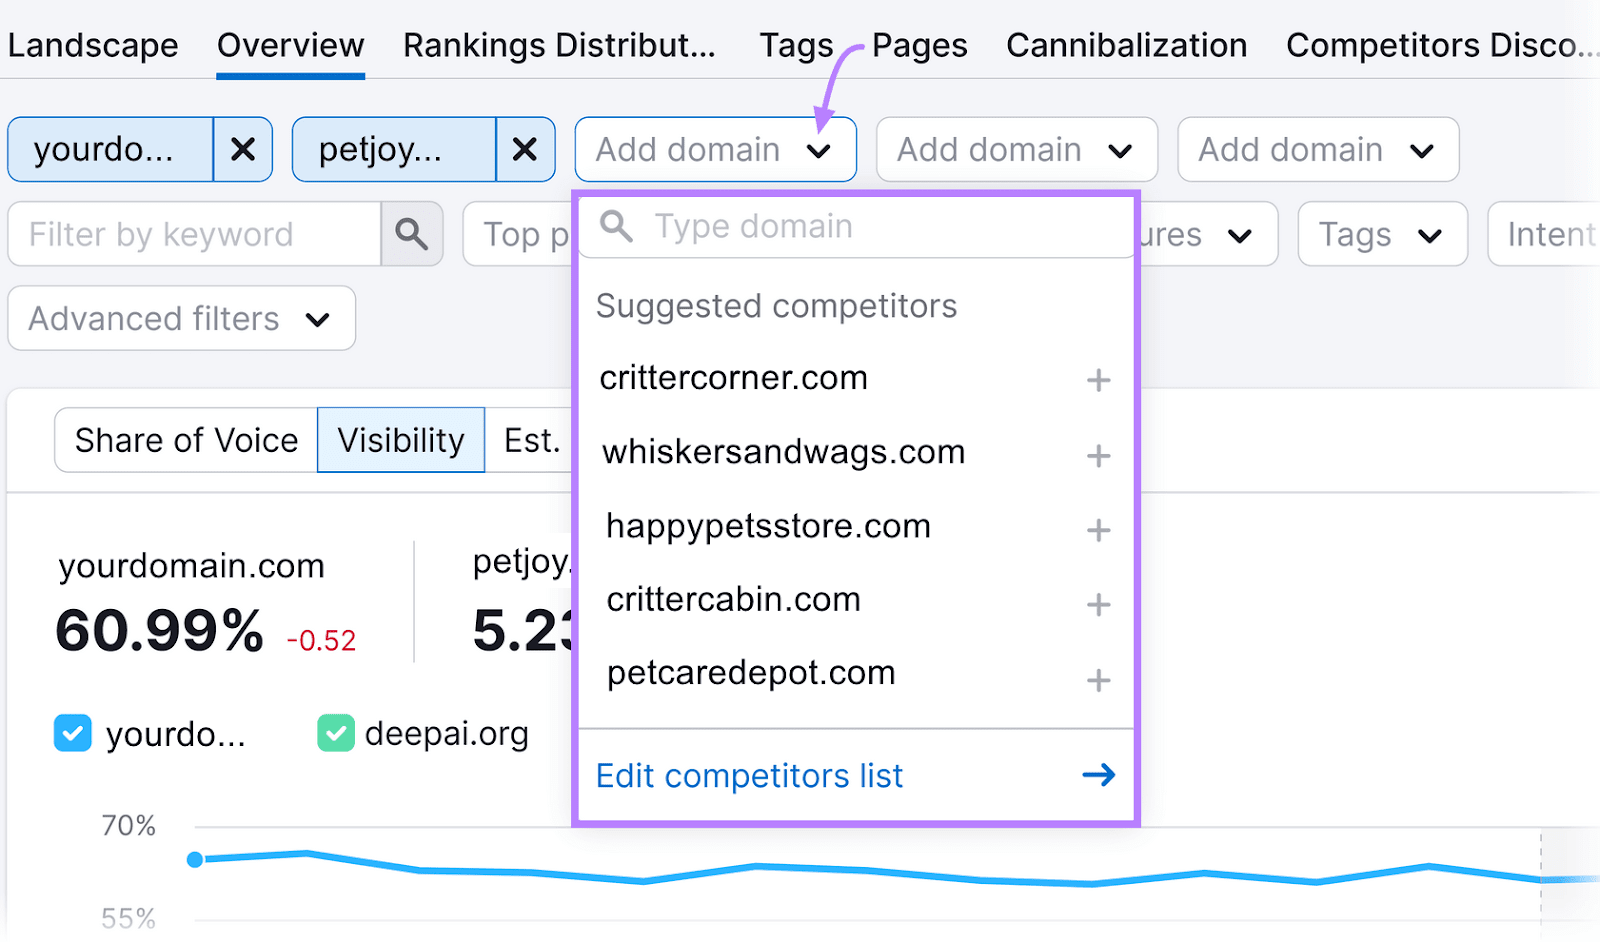 Position Tracking interface showing a dropdown menu extended from the "Add domain" box, showcasing "Suggested competitors."